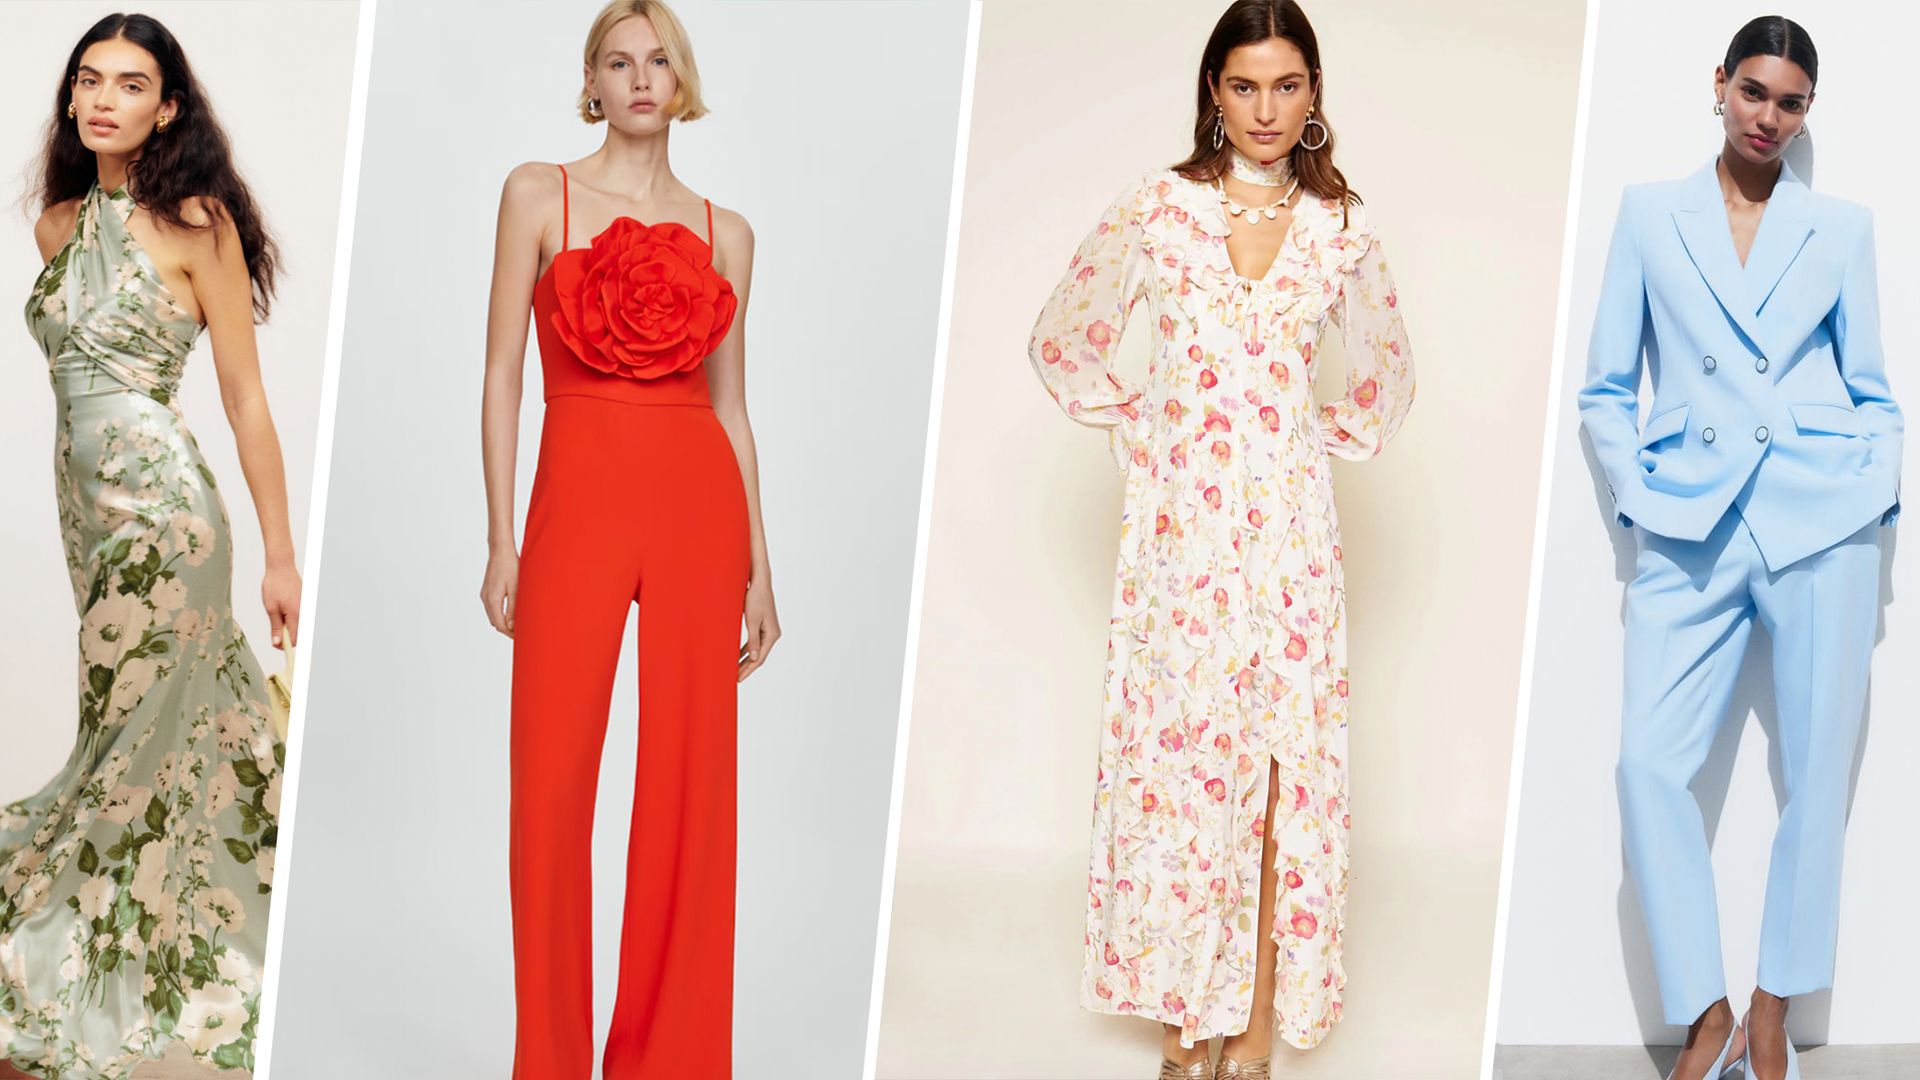 19 wedding guest outfit ideas: From beautiful dresses to chic jumpsuits